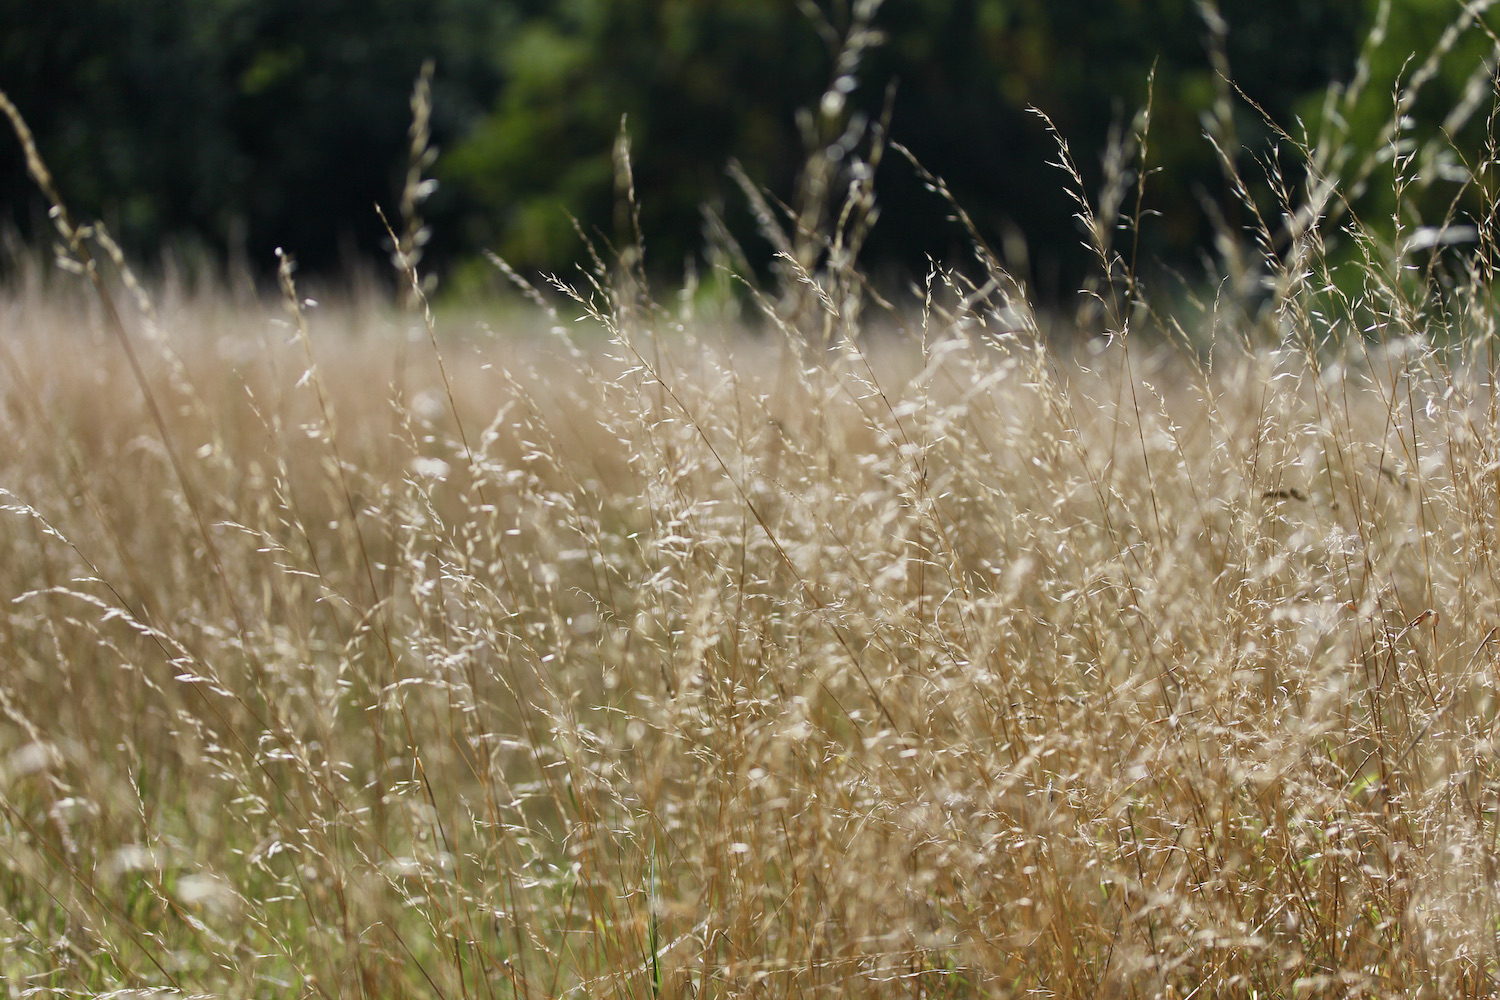 Field of grasses in peachy golden shades